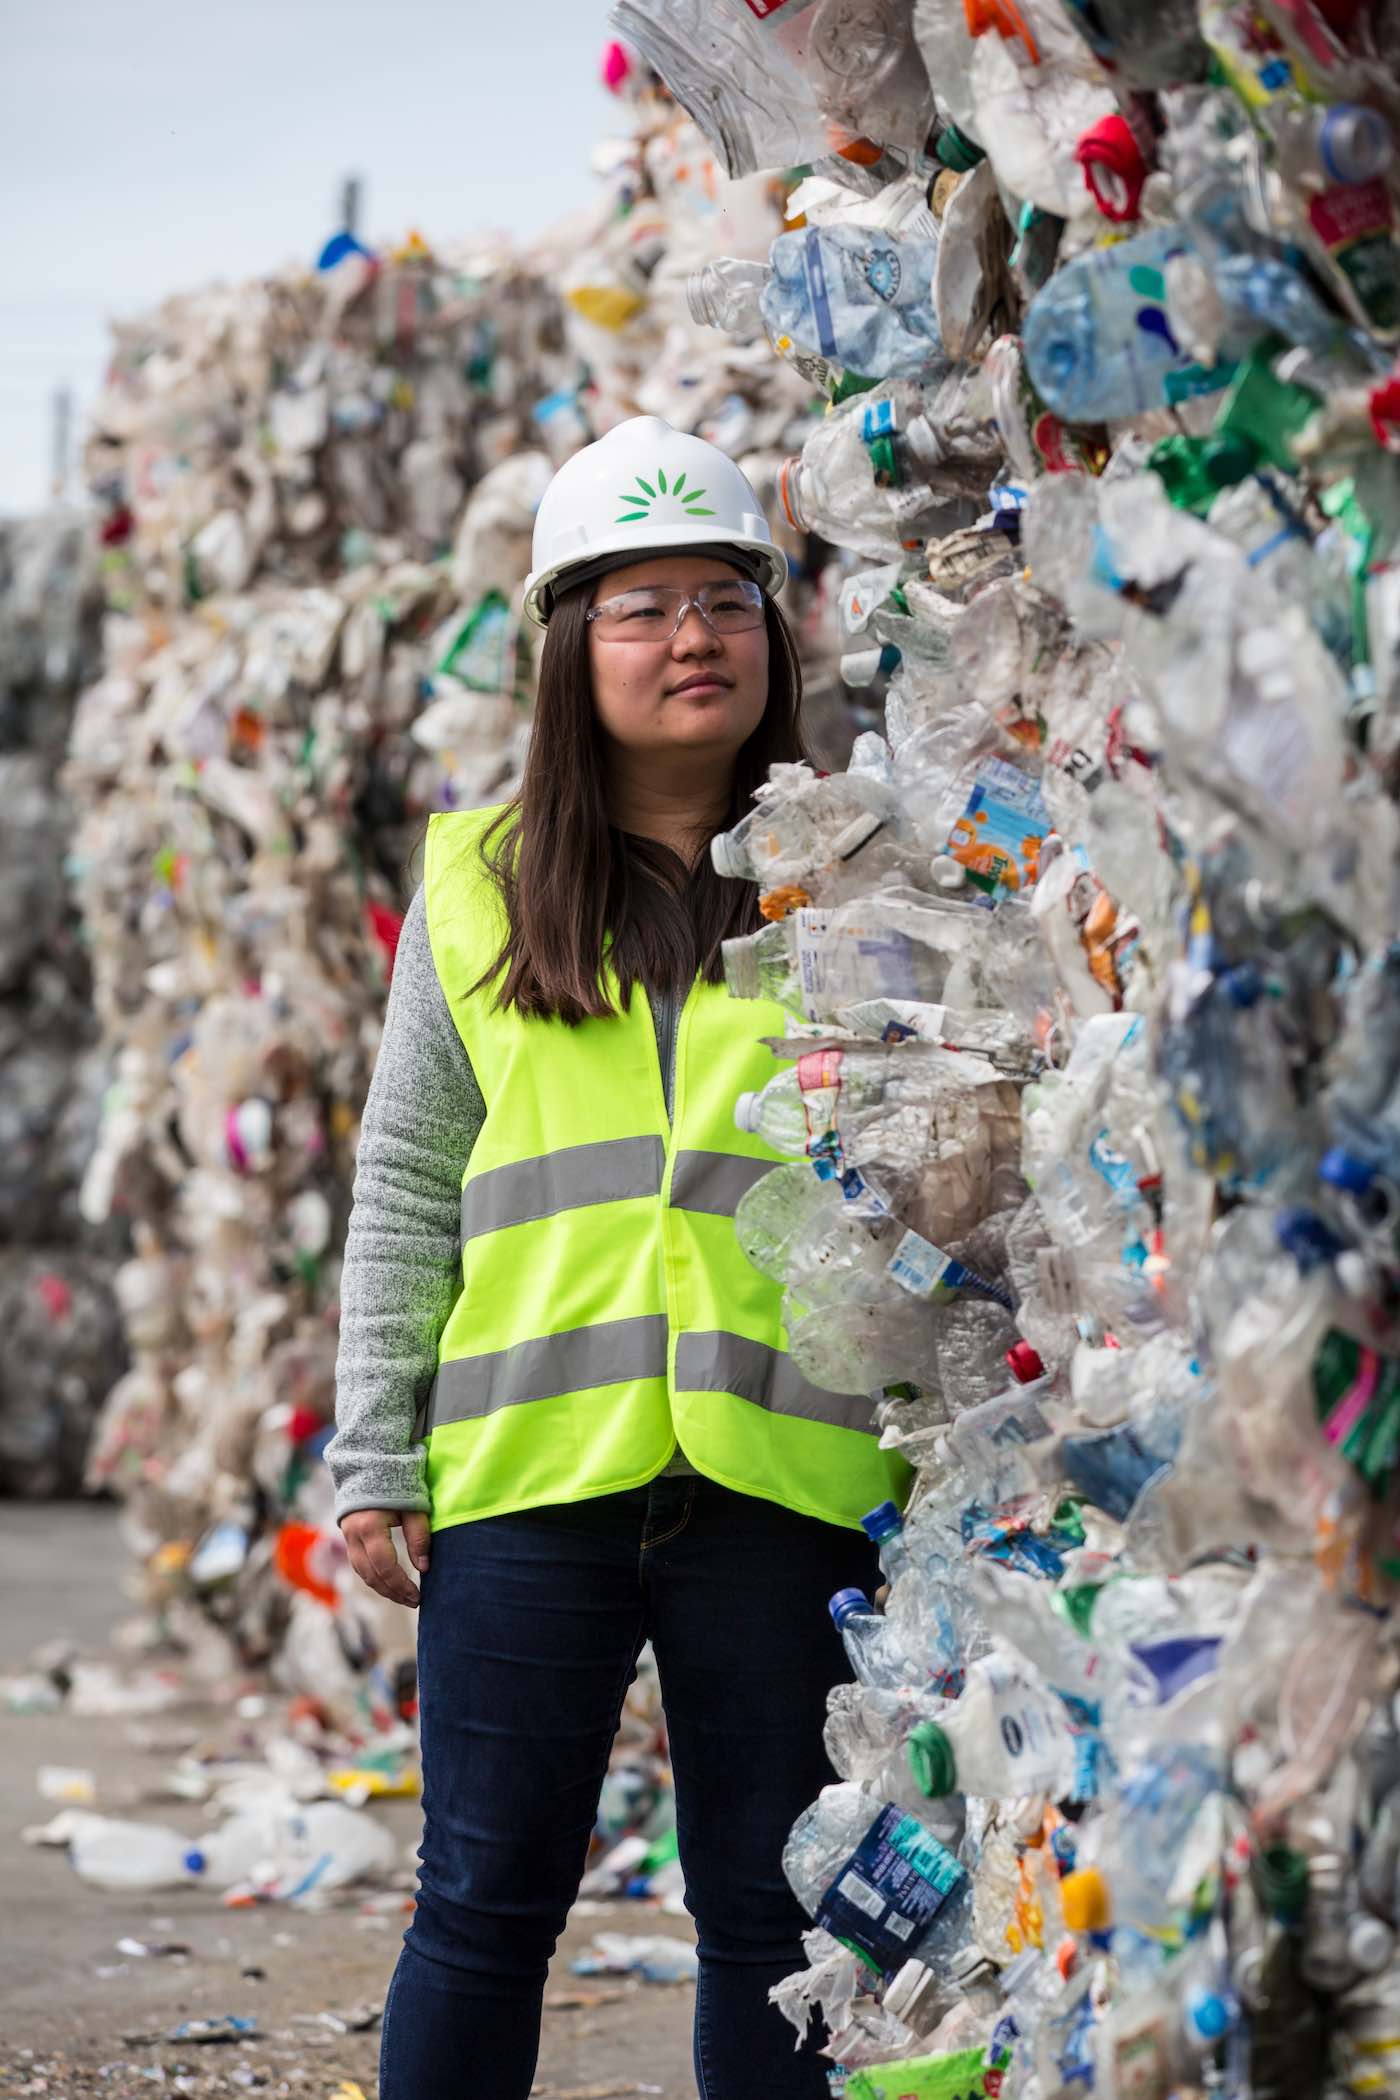 Miranda Wang at Greenwaste Recovery Facility, California, recycling plastic waste into useful chemicals for manufacturing.